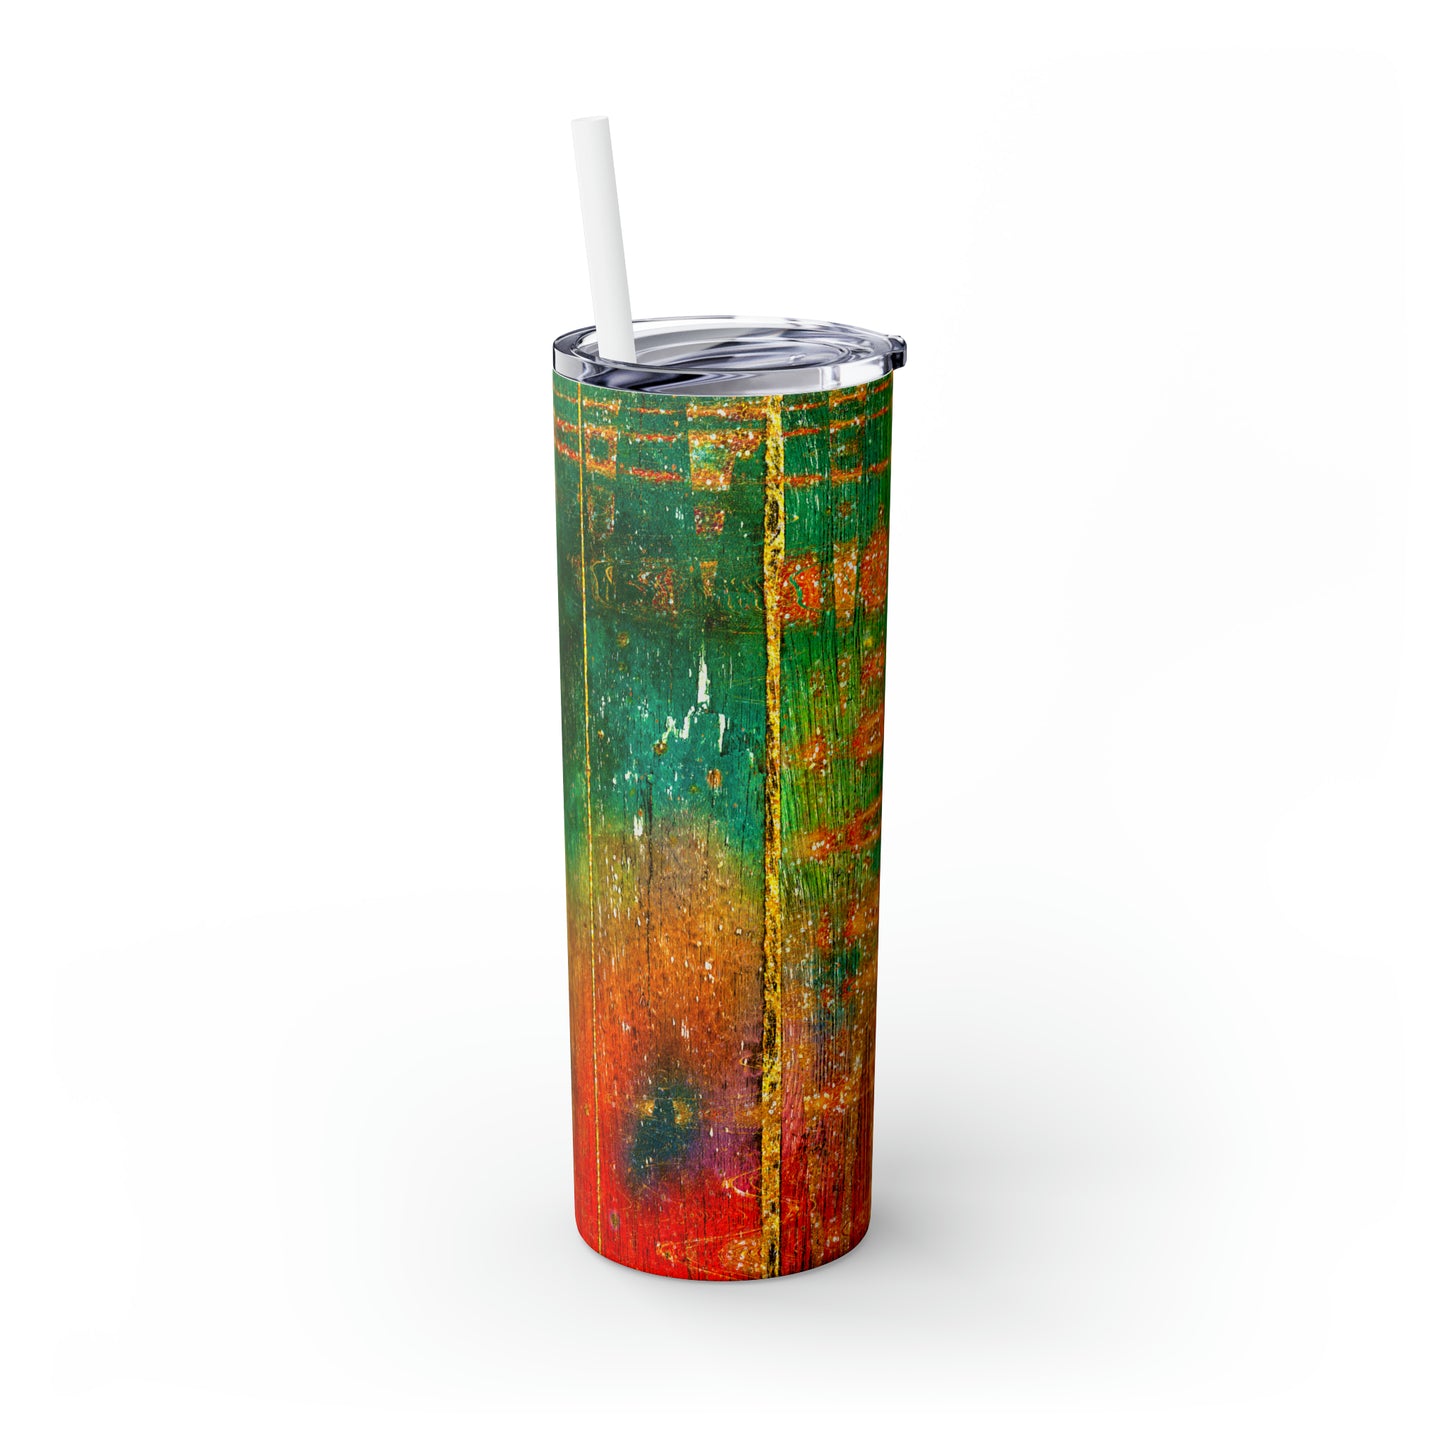 Wood Galaxy | Skinny Tumbler with Straw, 20oz | BPA-Free & Non-Toxic | Perfect For The Whole Family.